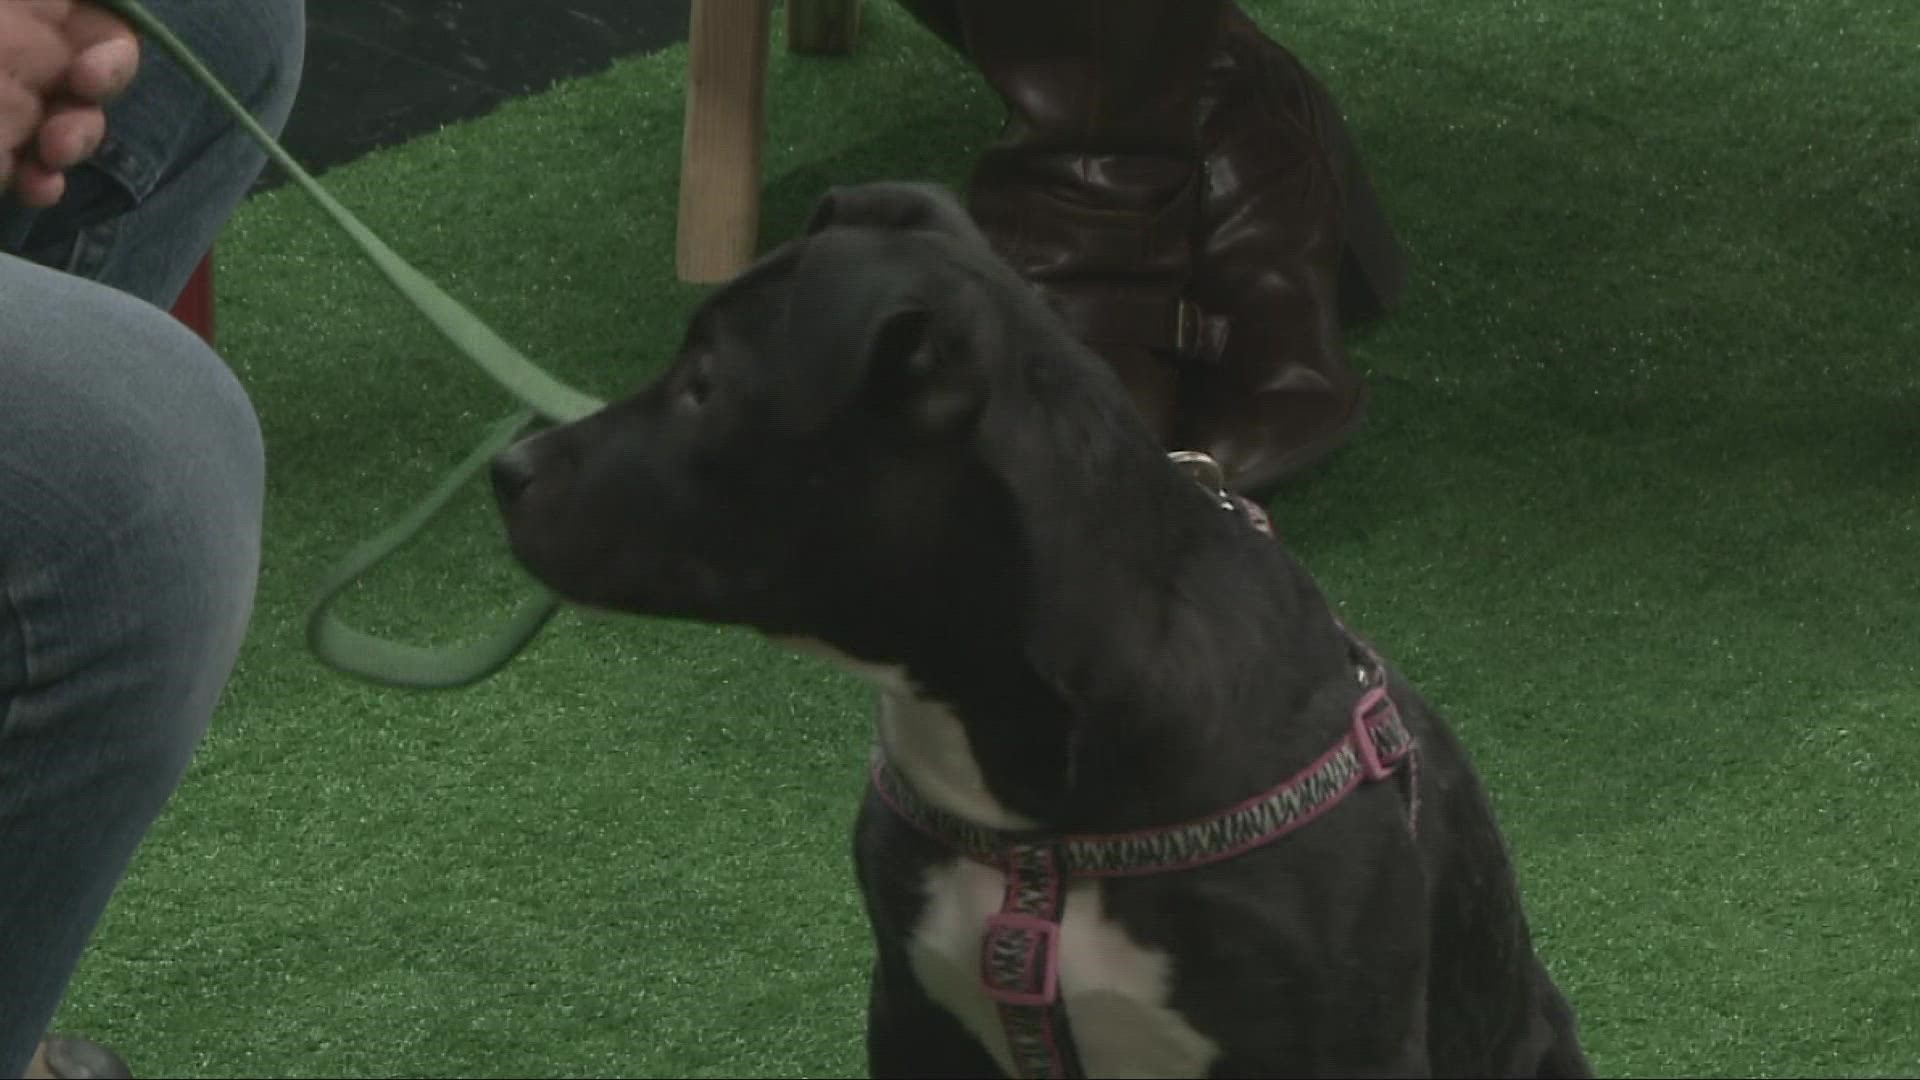 "Bean" was featured on Saturday as 3News' Pet of the Week.